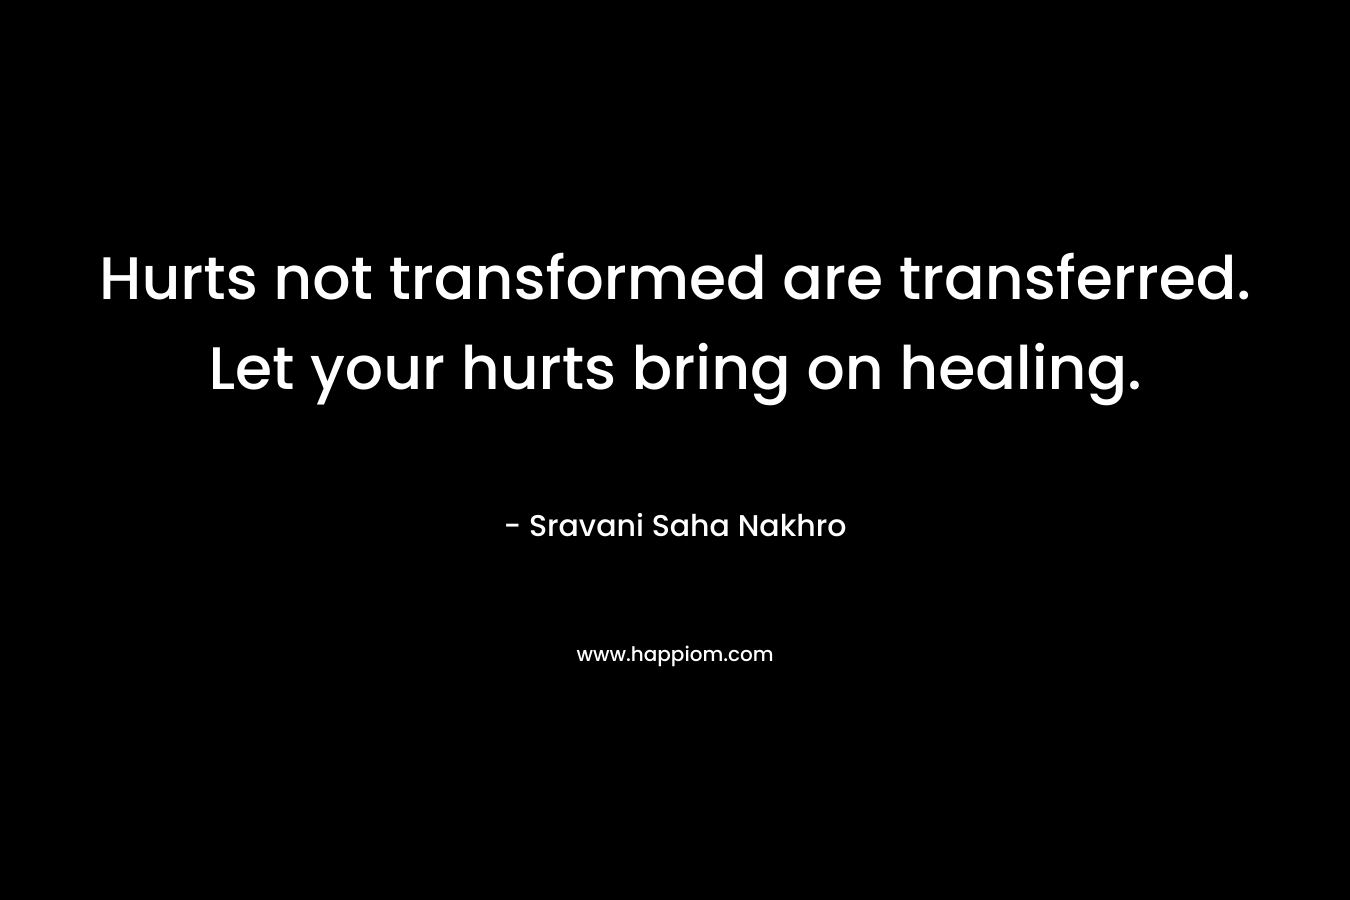 Hurts not transformed are transferred. Let your hurts bring on healing.